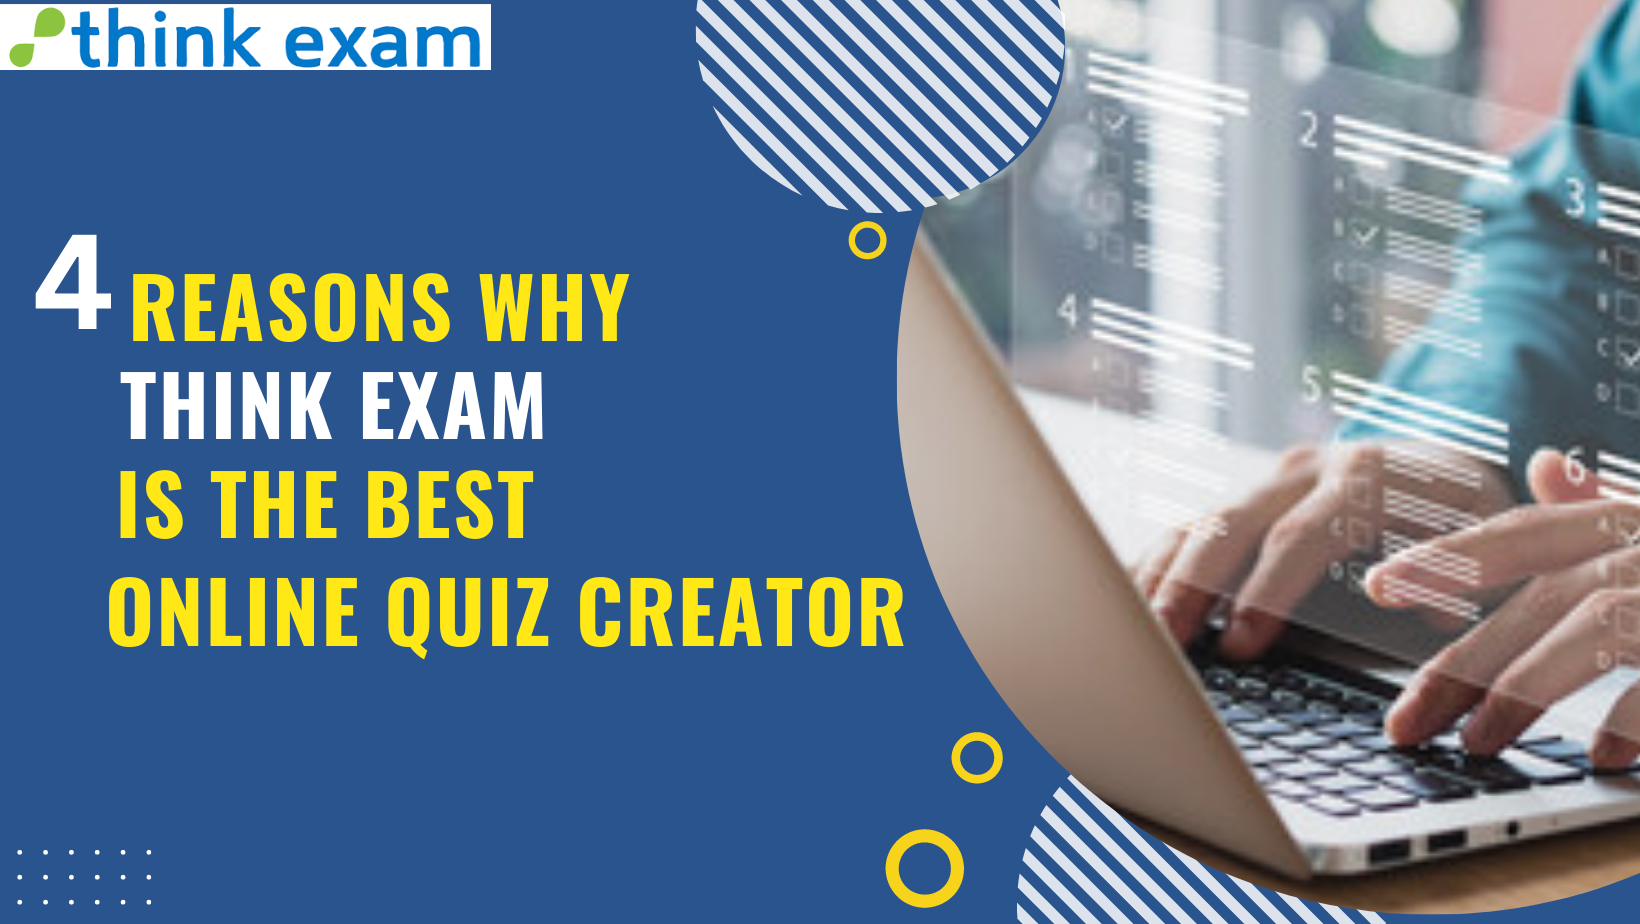 Four-Reasons-Why-Think-Exam-is-the-Best-Online-Quiz-Creator-2.png